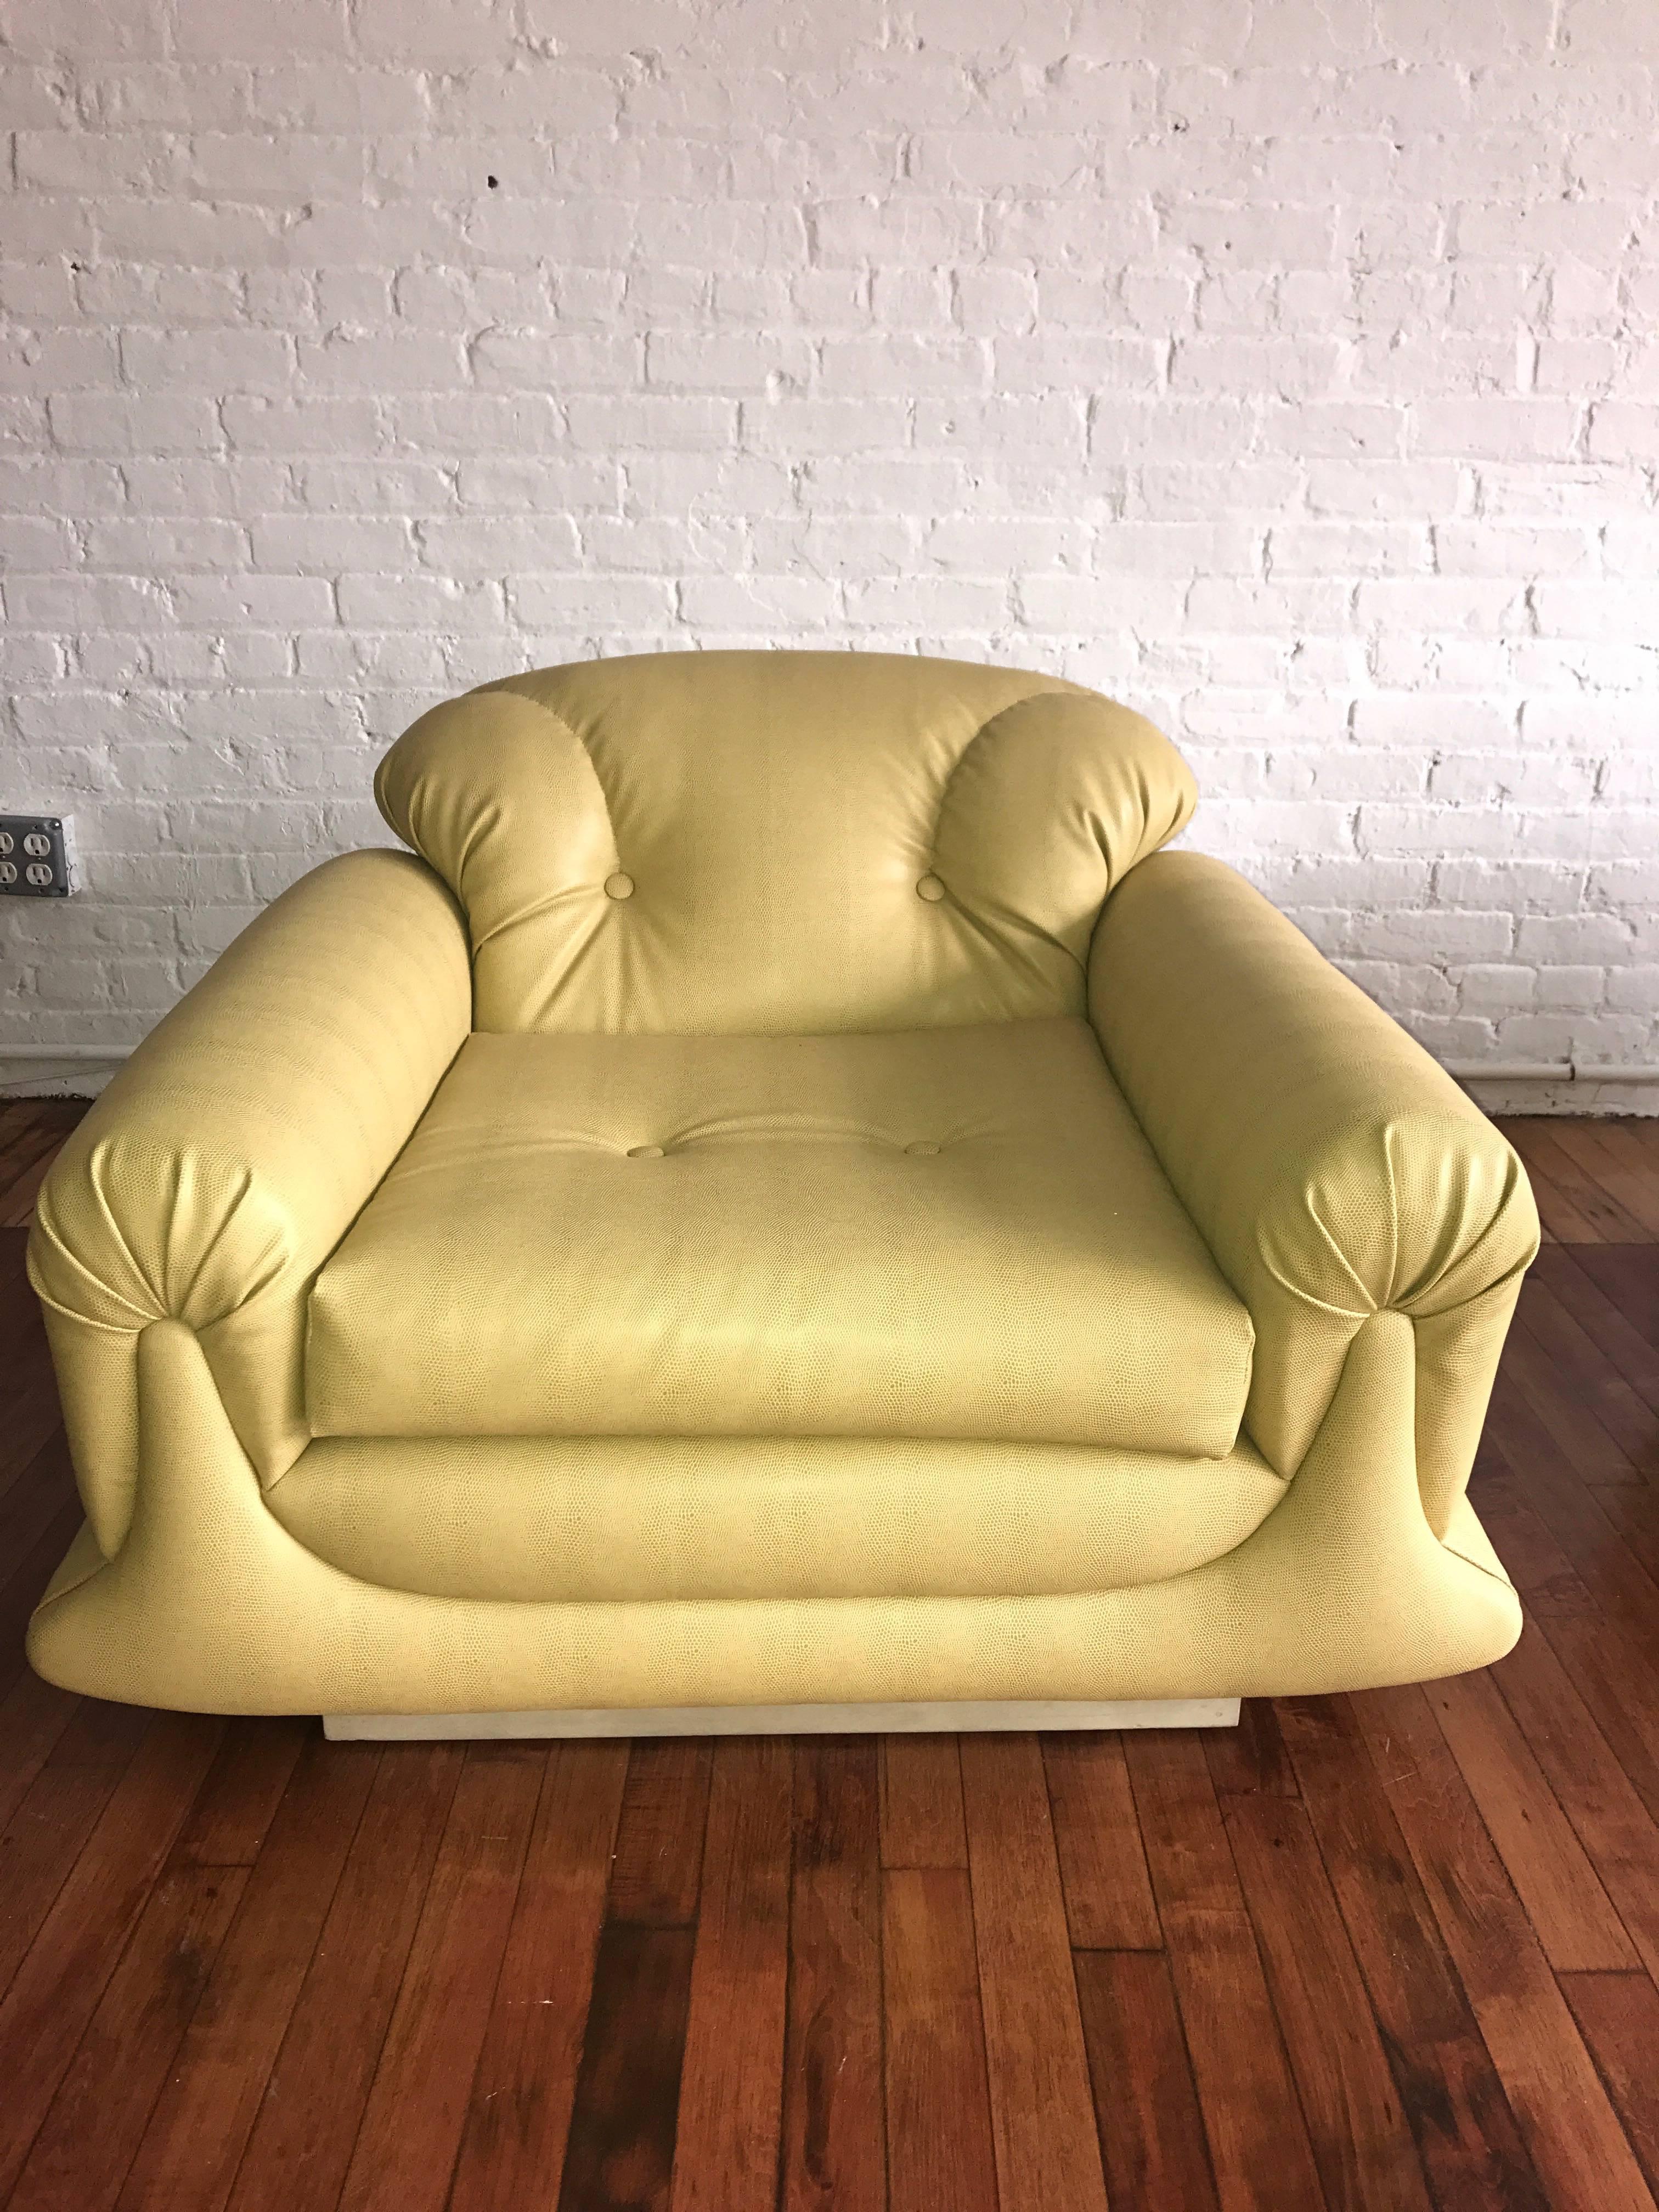 Mid-20th Century Mod Overstuffed Green Vinyl Lounge Chair For Sale